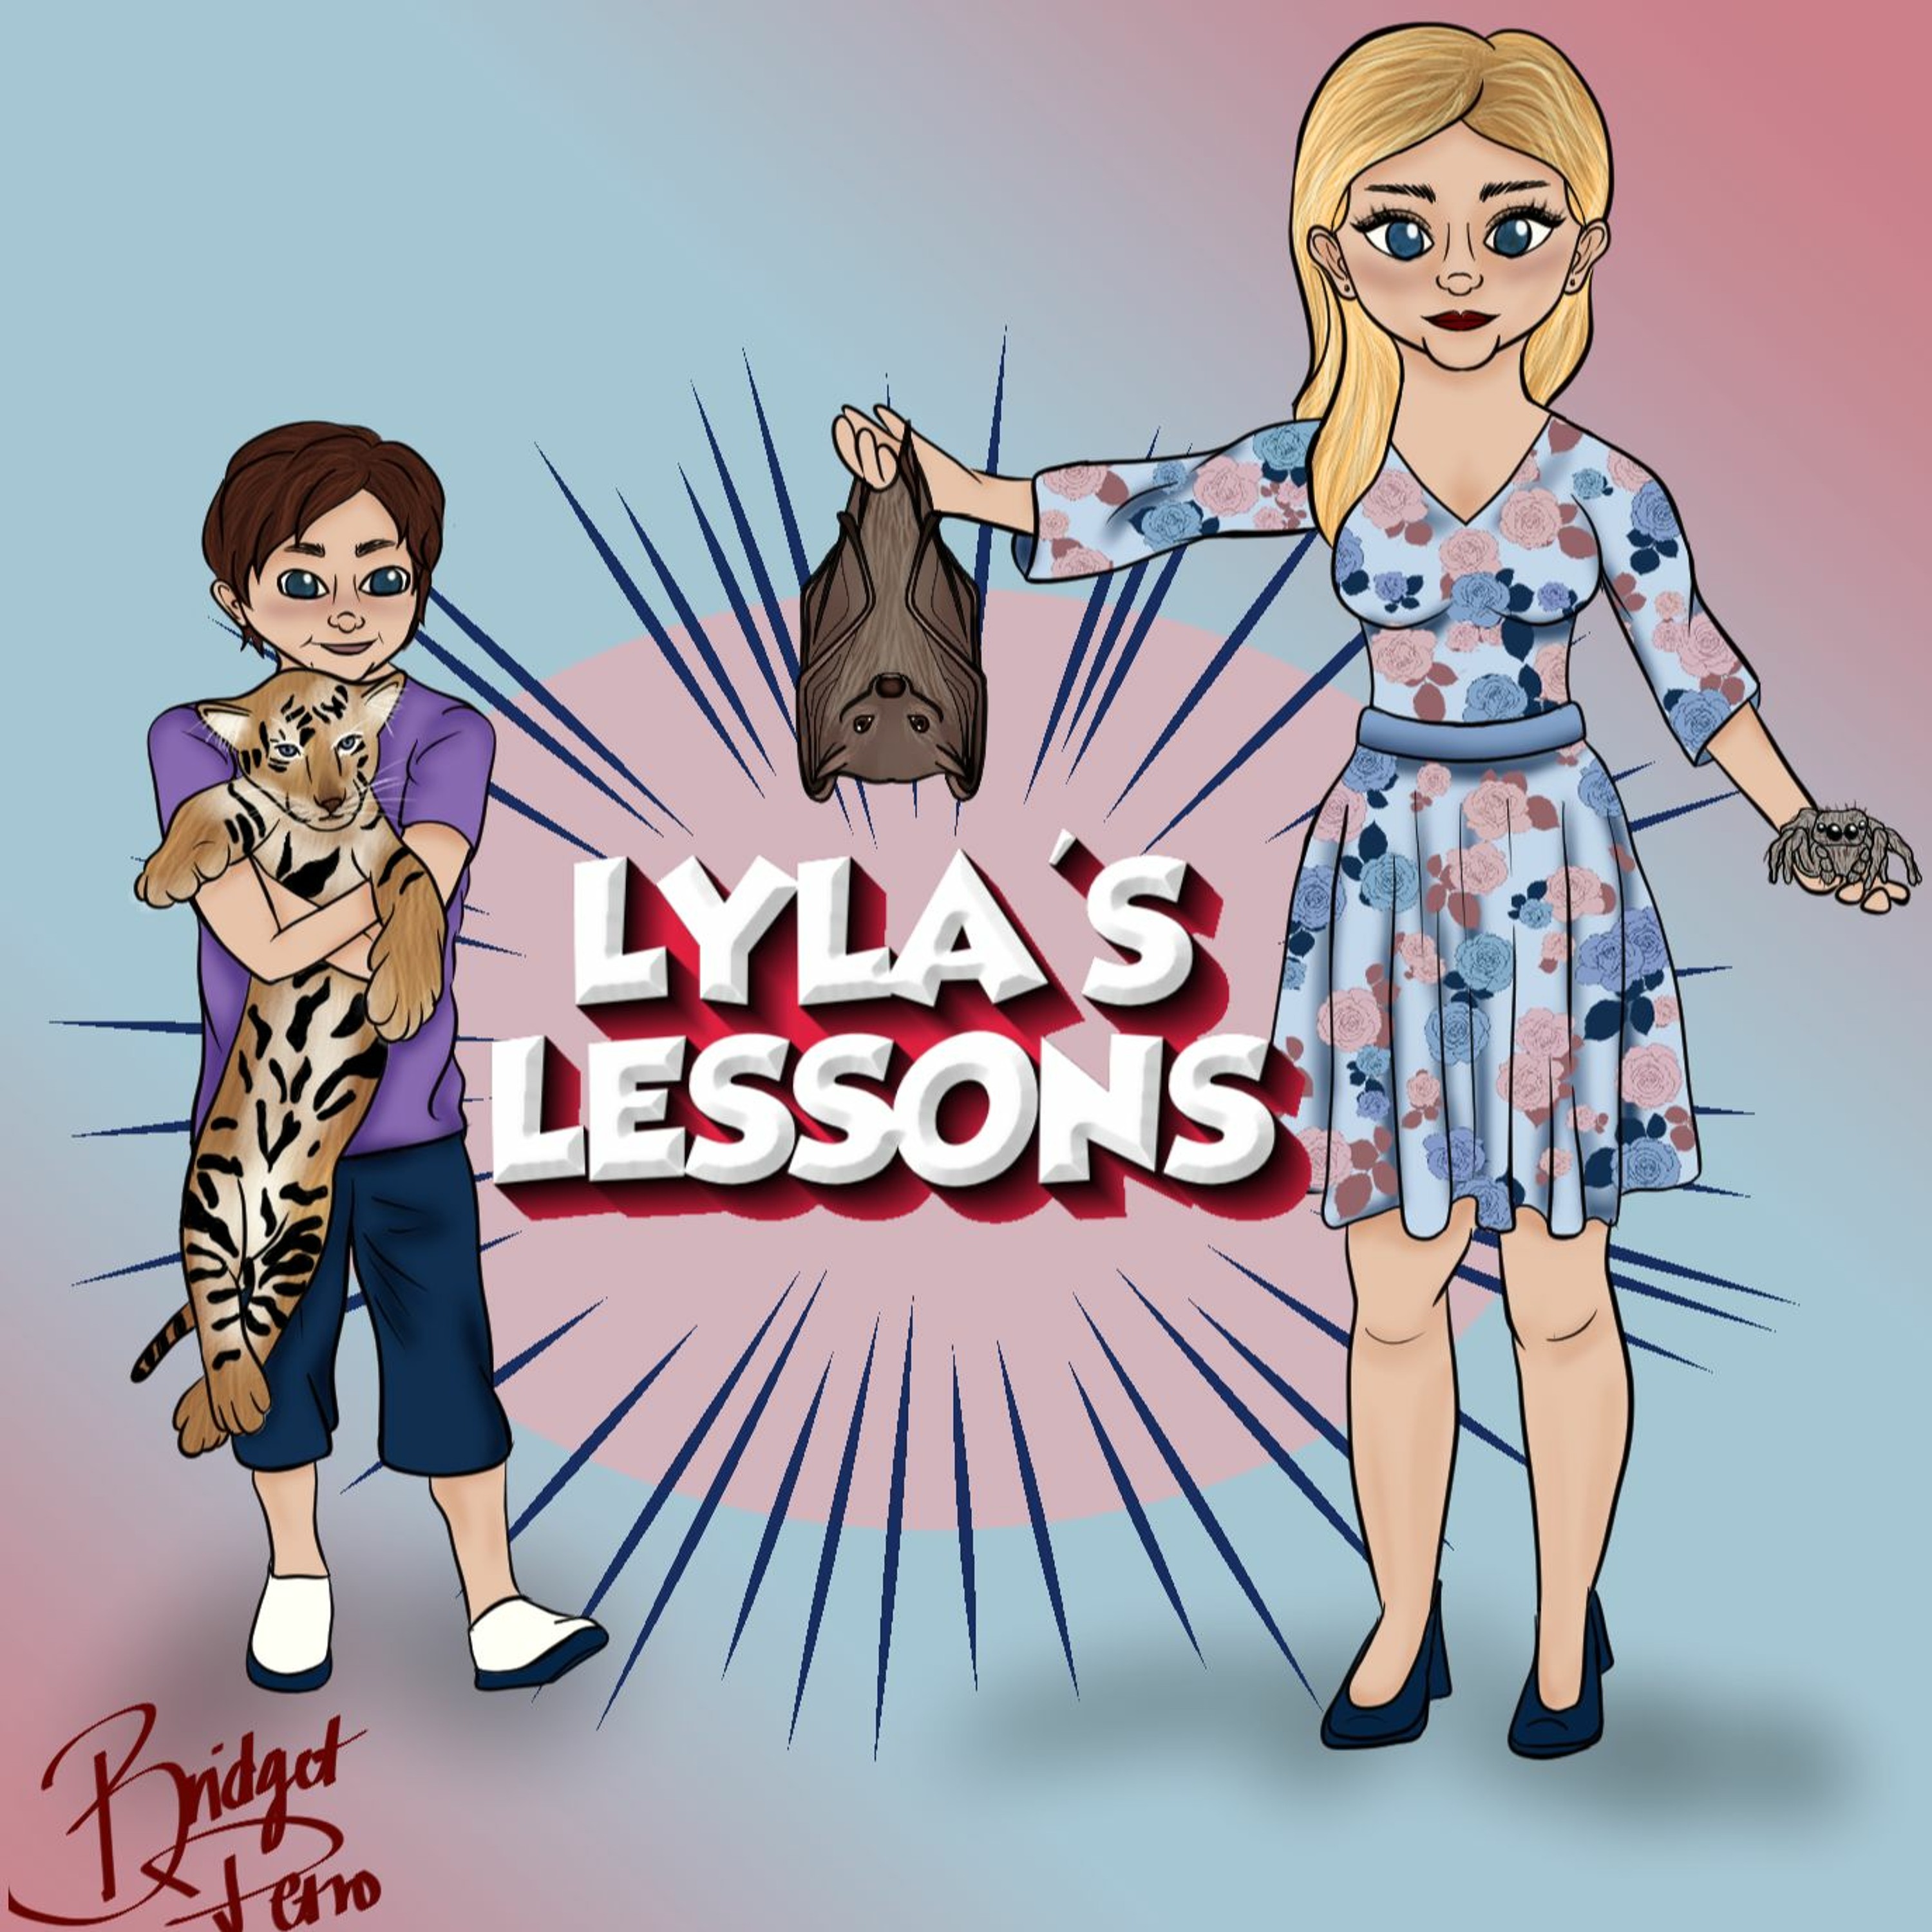 ”Lyla’s Lessons”- Howling at the Moonstone